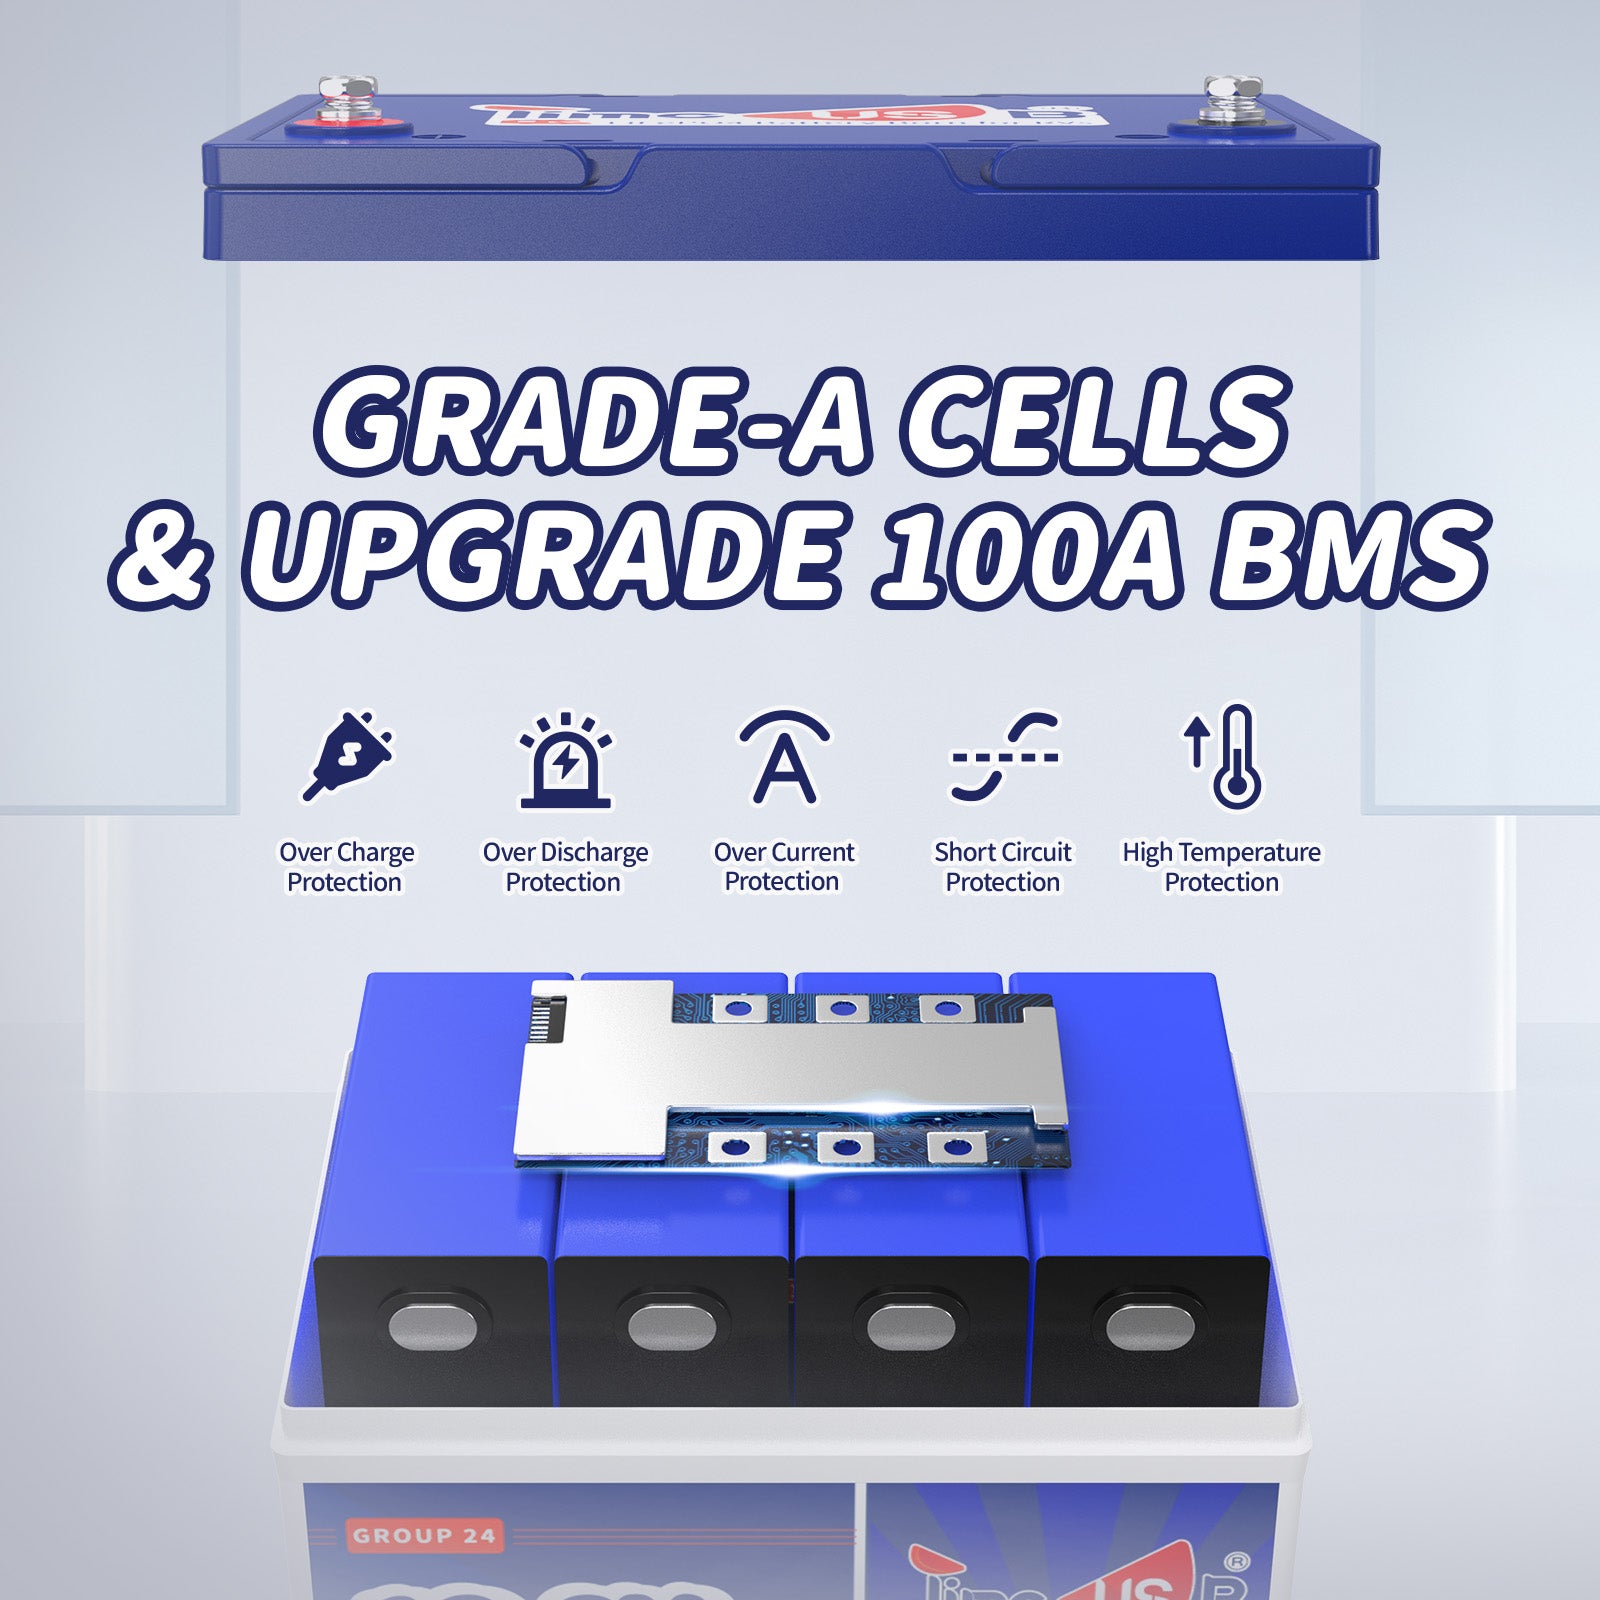 Timeusb 12V 100Ah Group24 size LiFePO4 Battery, 1280Wh & 100A BMS